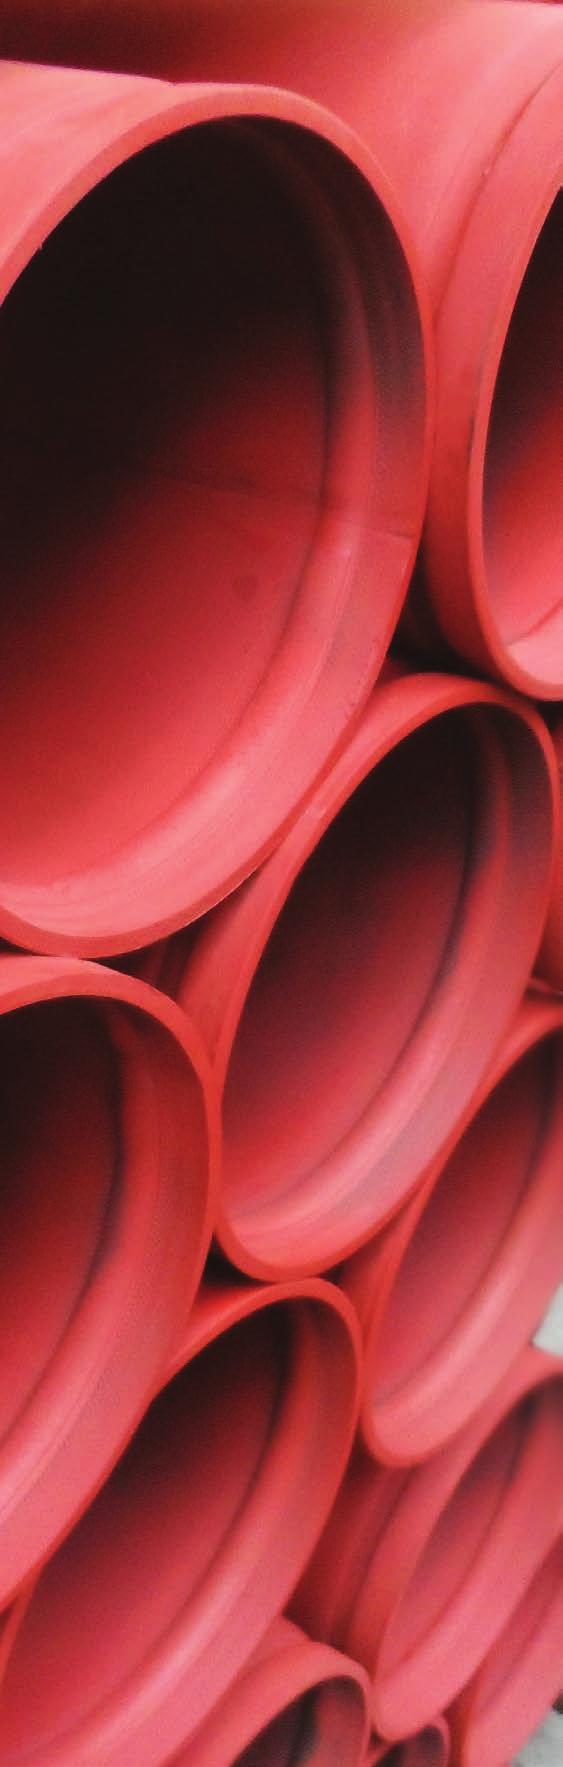 Shawston - Victaulic Roll Grooved Steel Tube Shawston process all steel tube in-house, this gives us the flexibility to process steel tube for you, off-site, eliminating the need for any hot works,